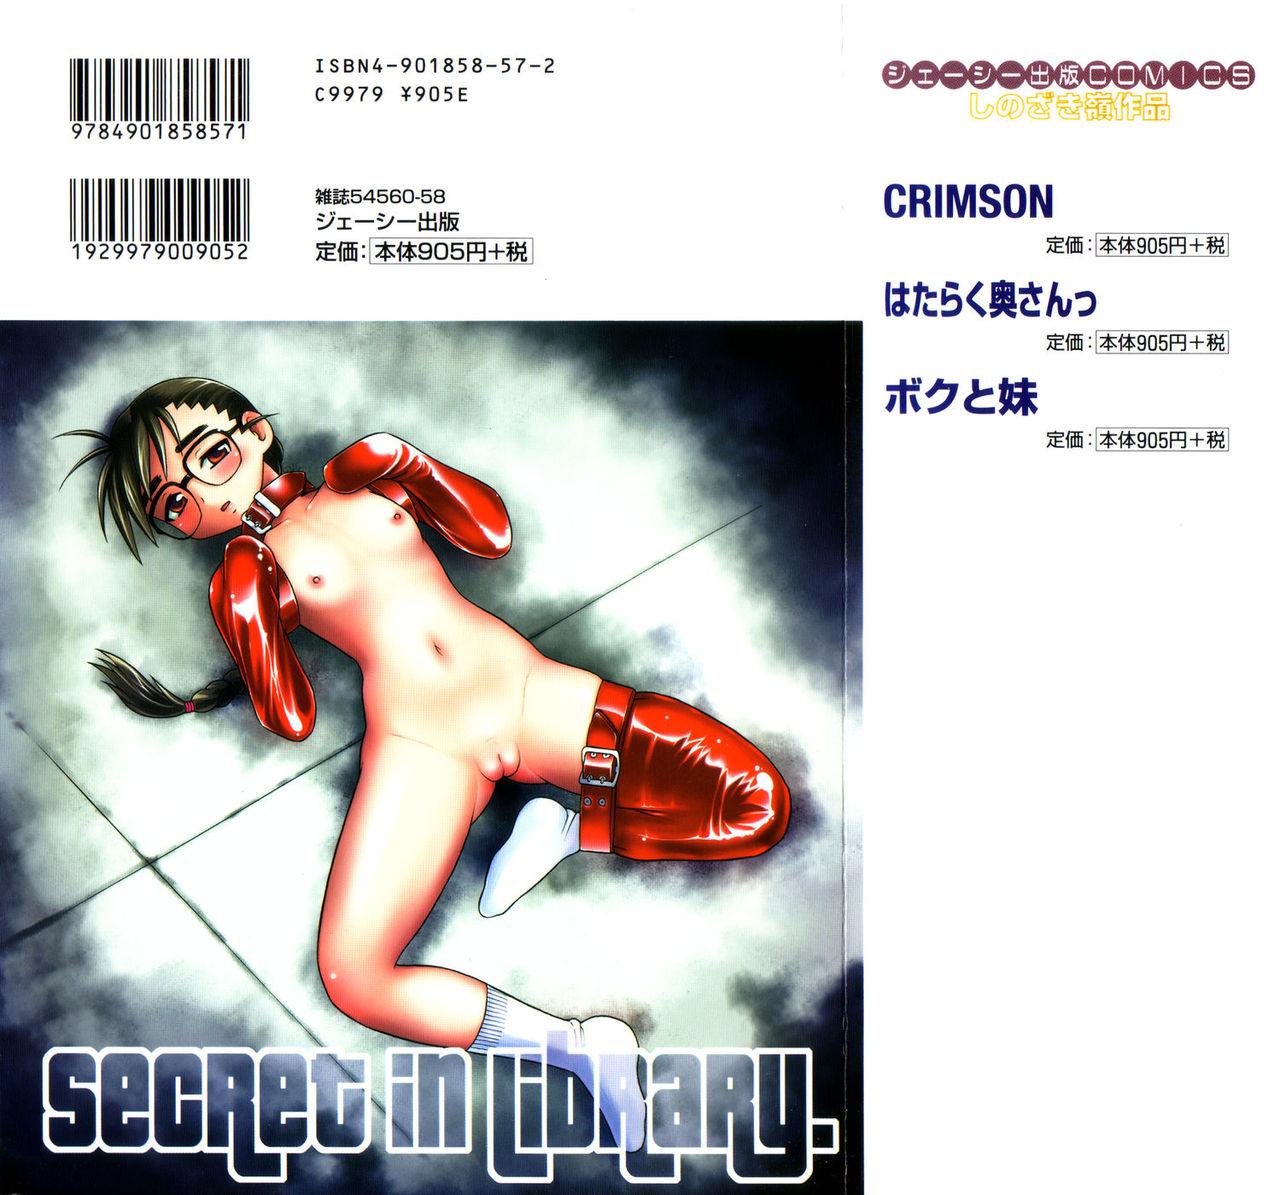 Toshoshitsu no Himitsu - Secret In Library. | Secret In The Library 1